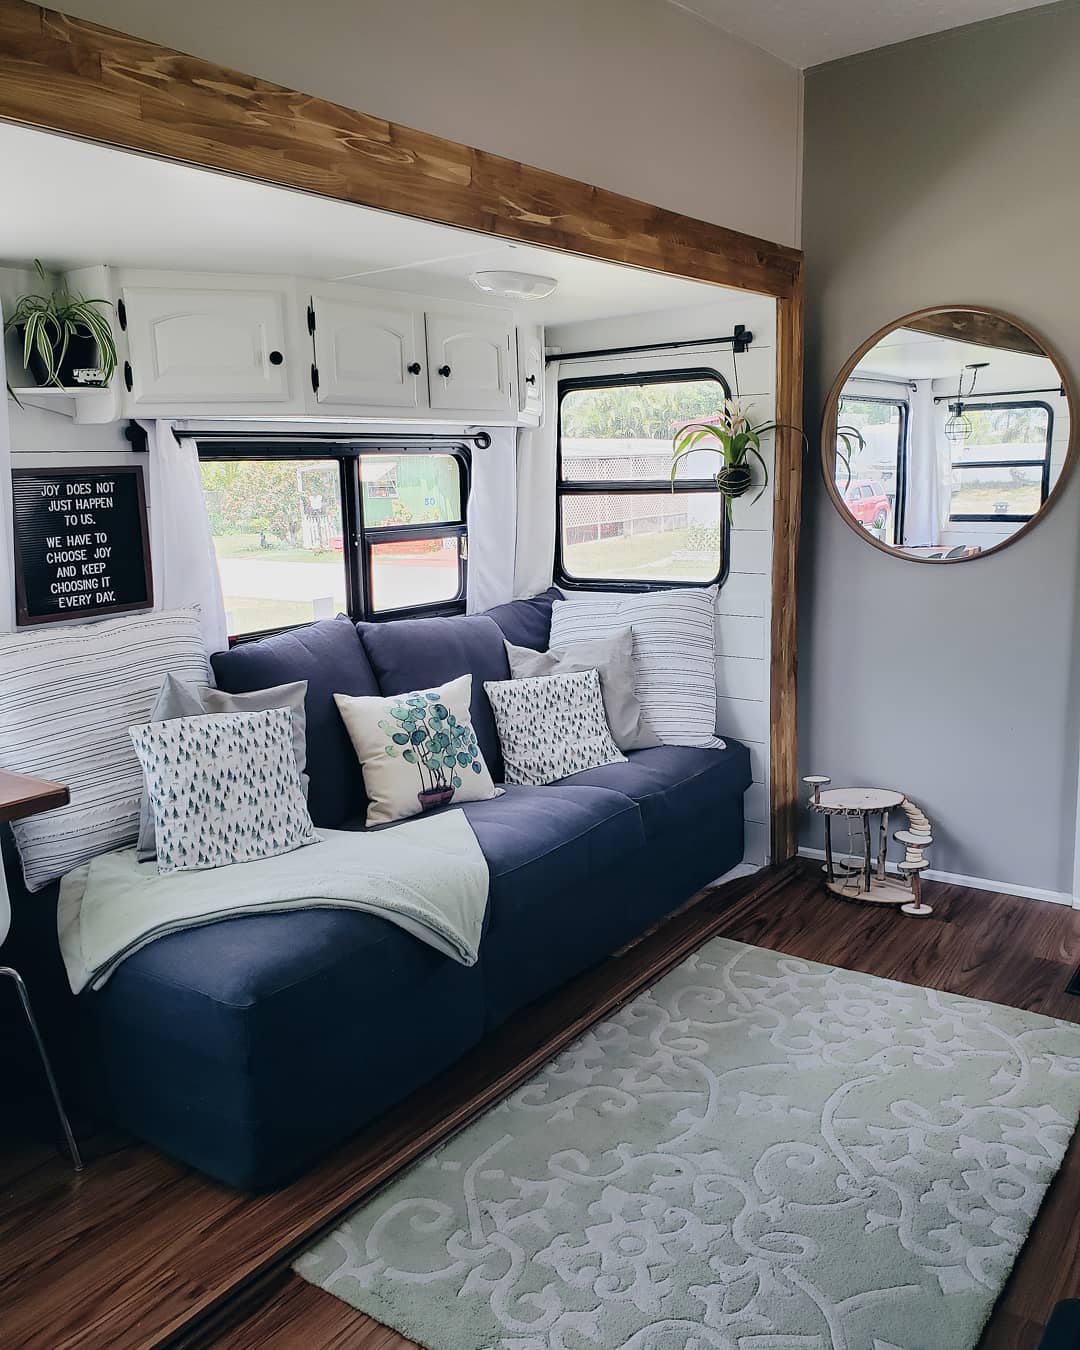 updated RV interior with gray and white walls and a blue couch photo by Instagram user @rvsandtrees